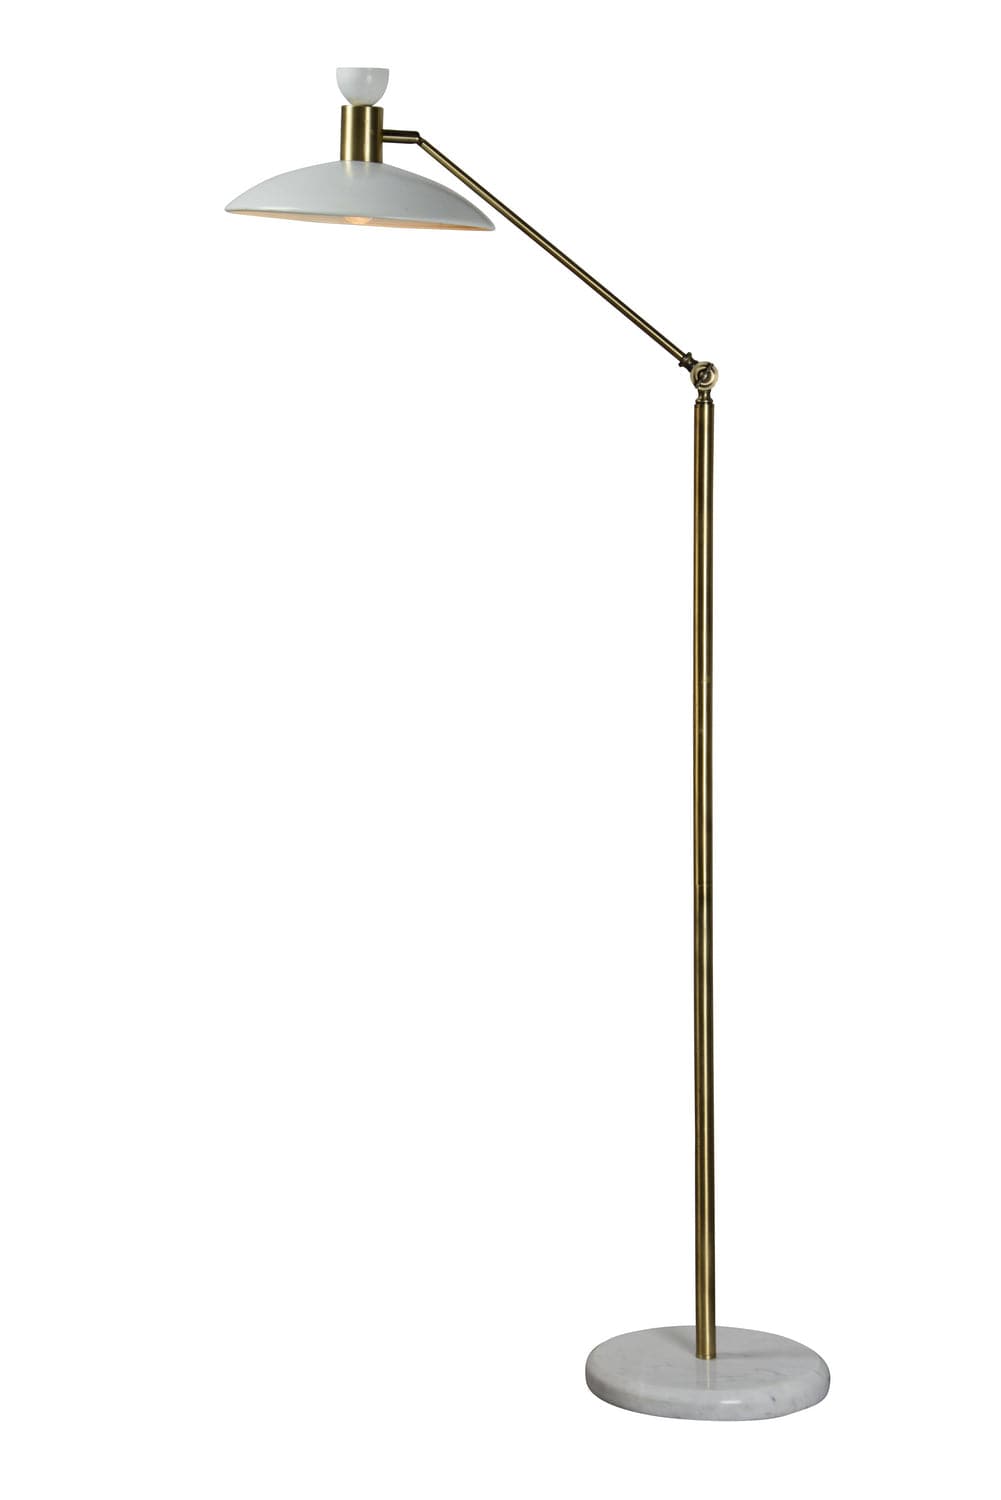 Renwil - LPF3037 - One Light Floor Lamp - Troilus - Polished Brass